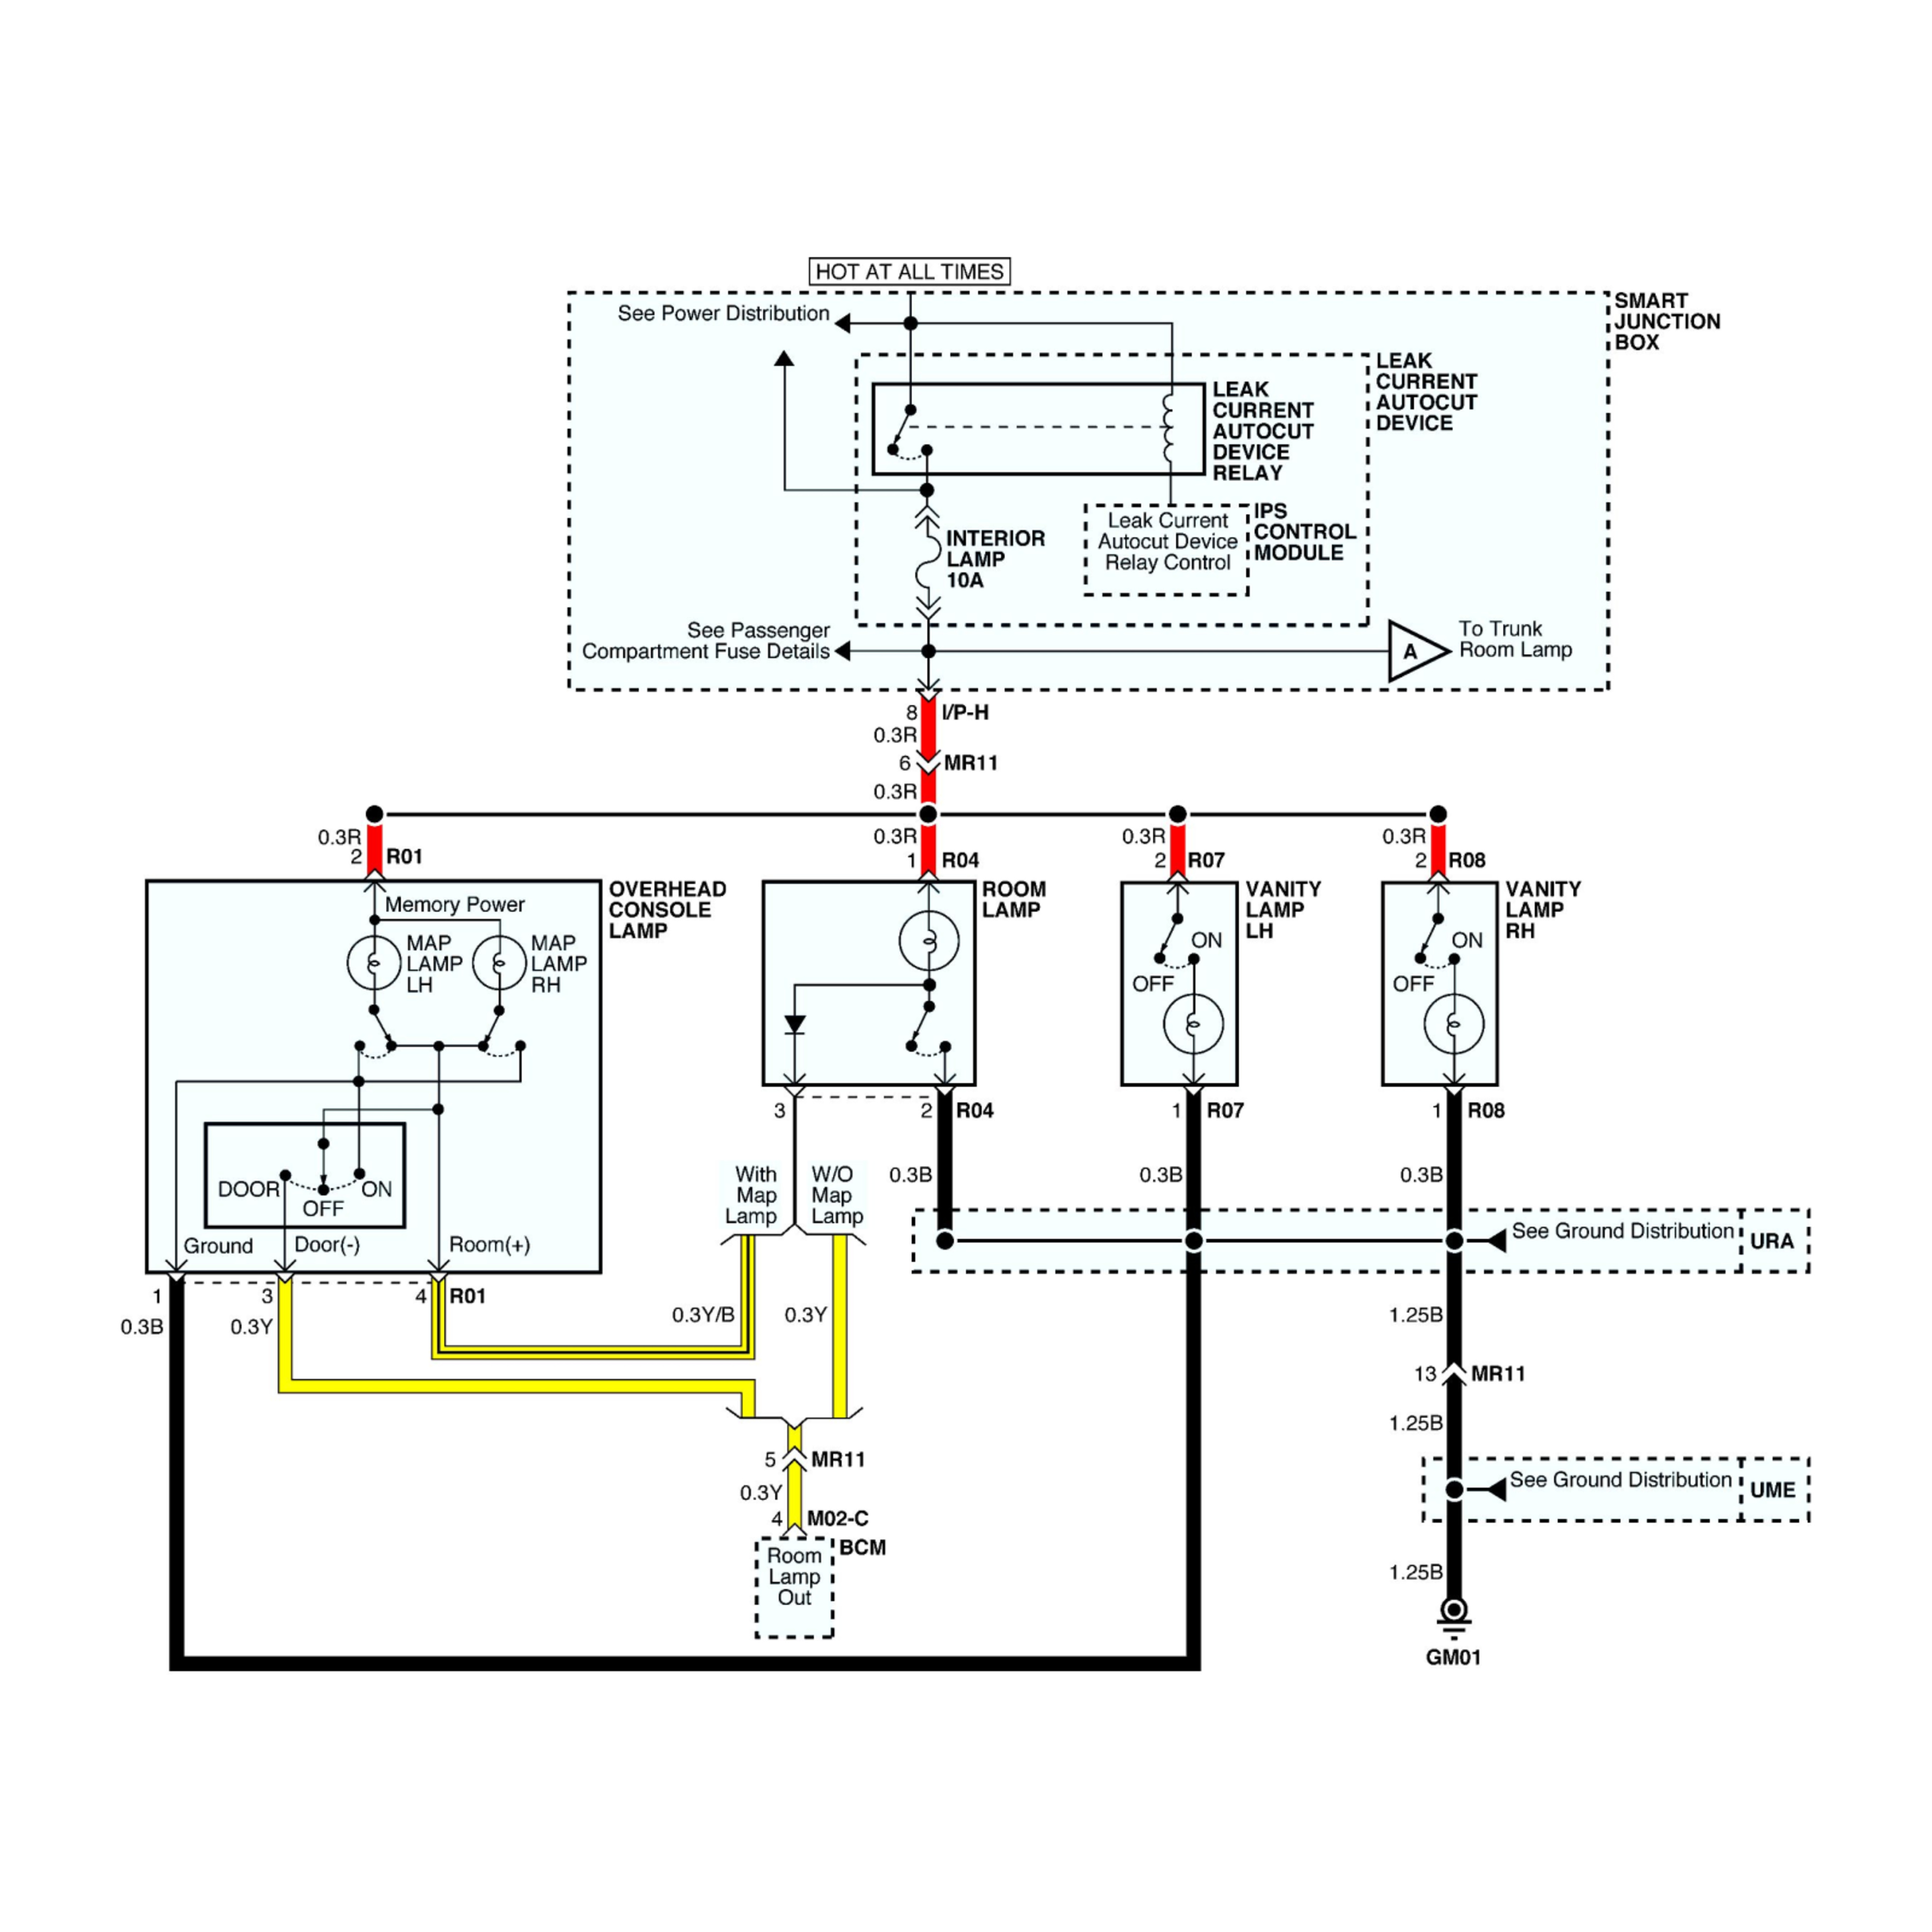 2009 Acura MDX wiring diagrams example